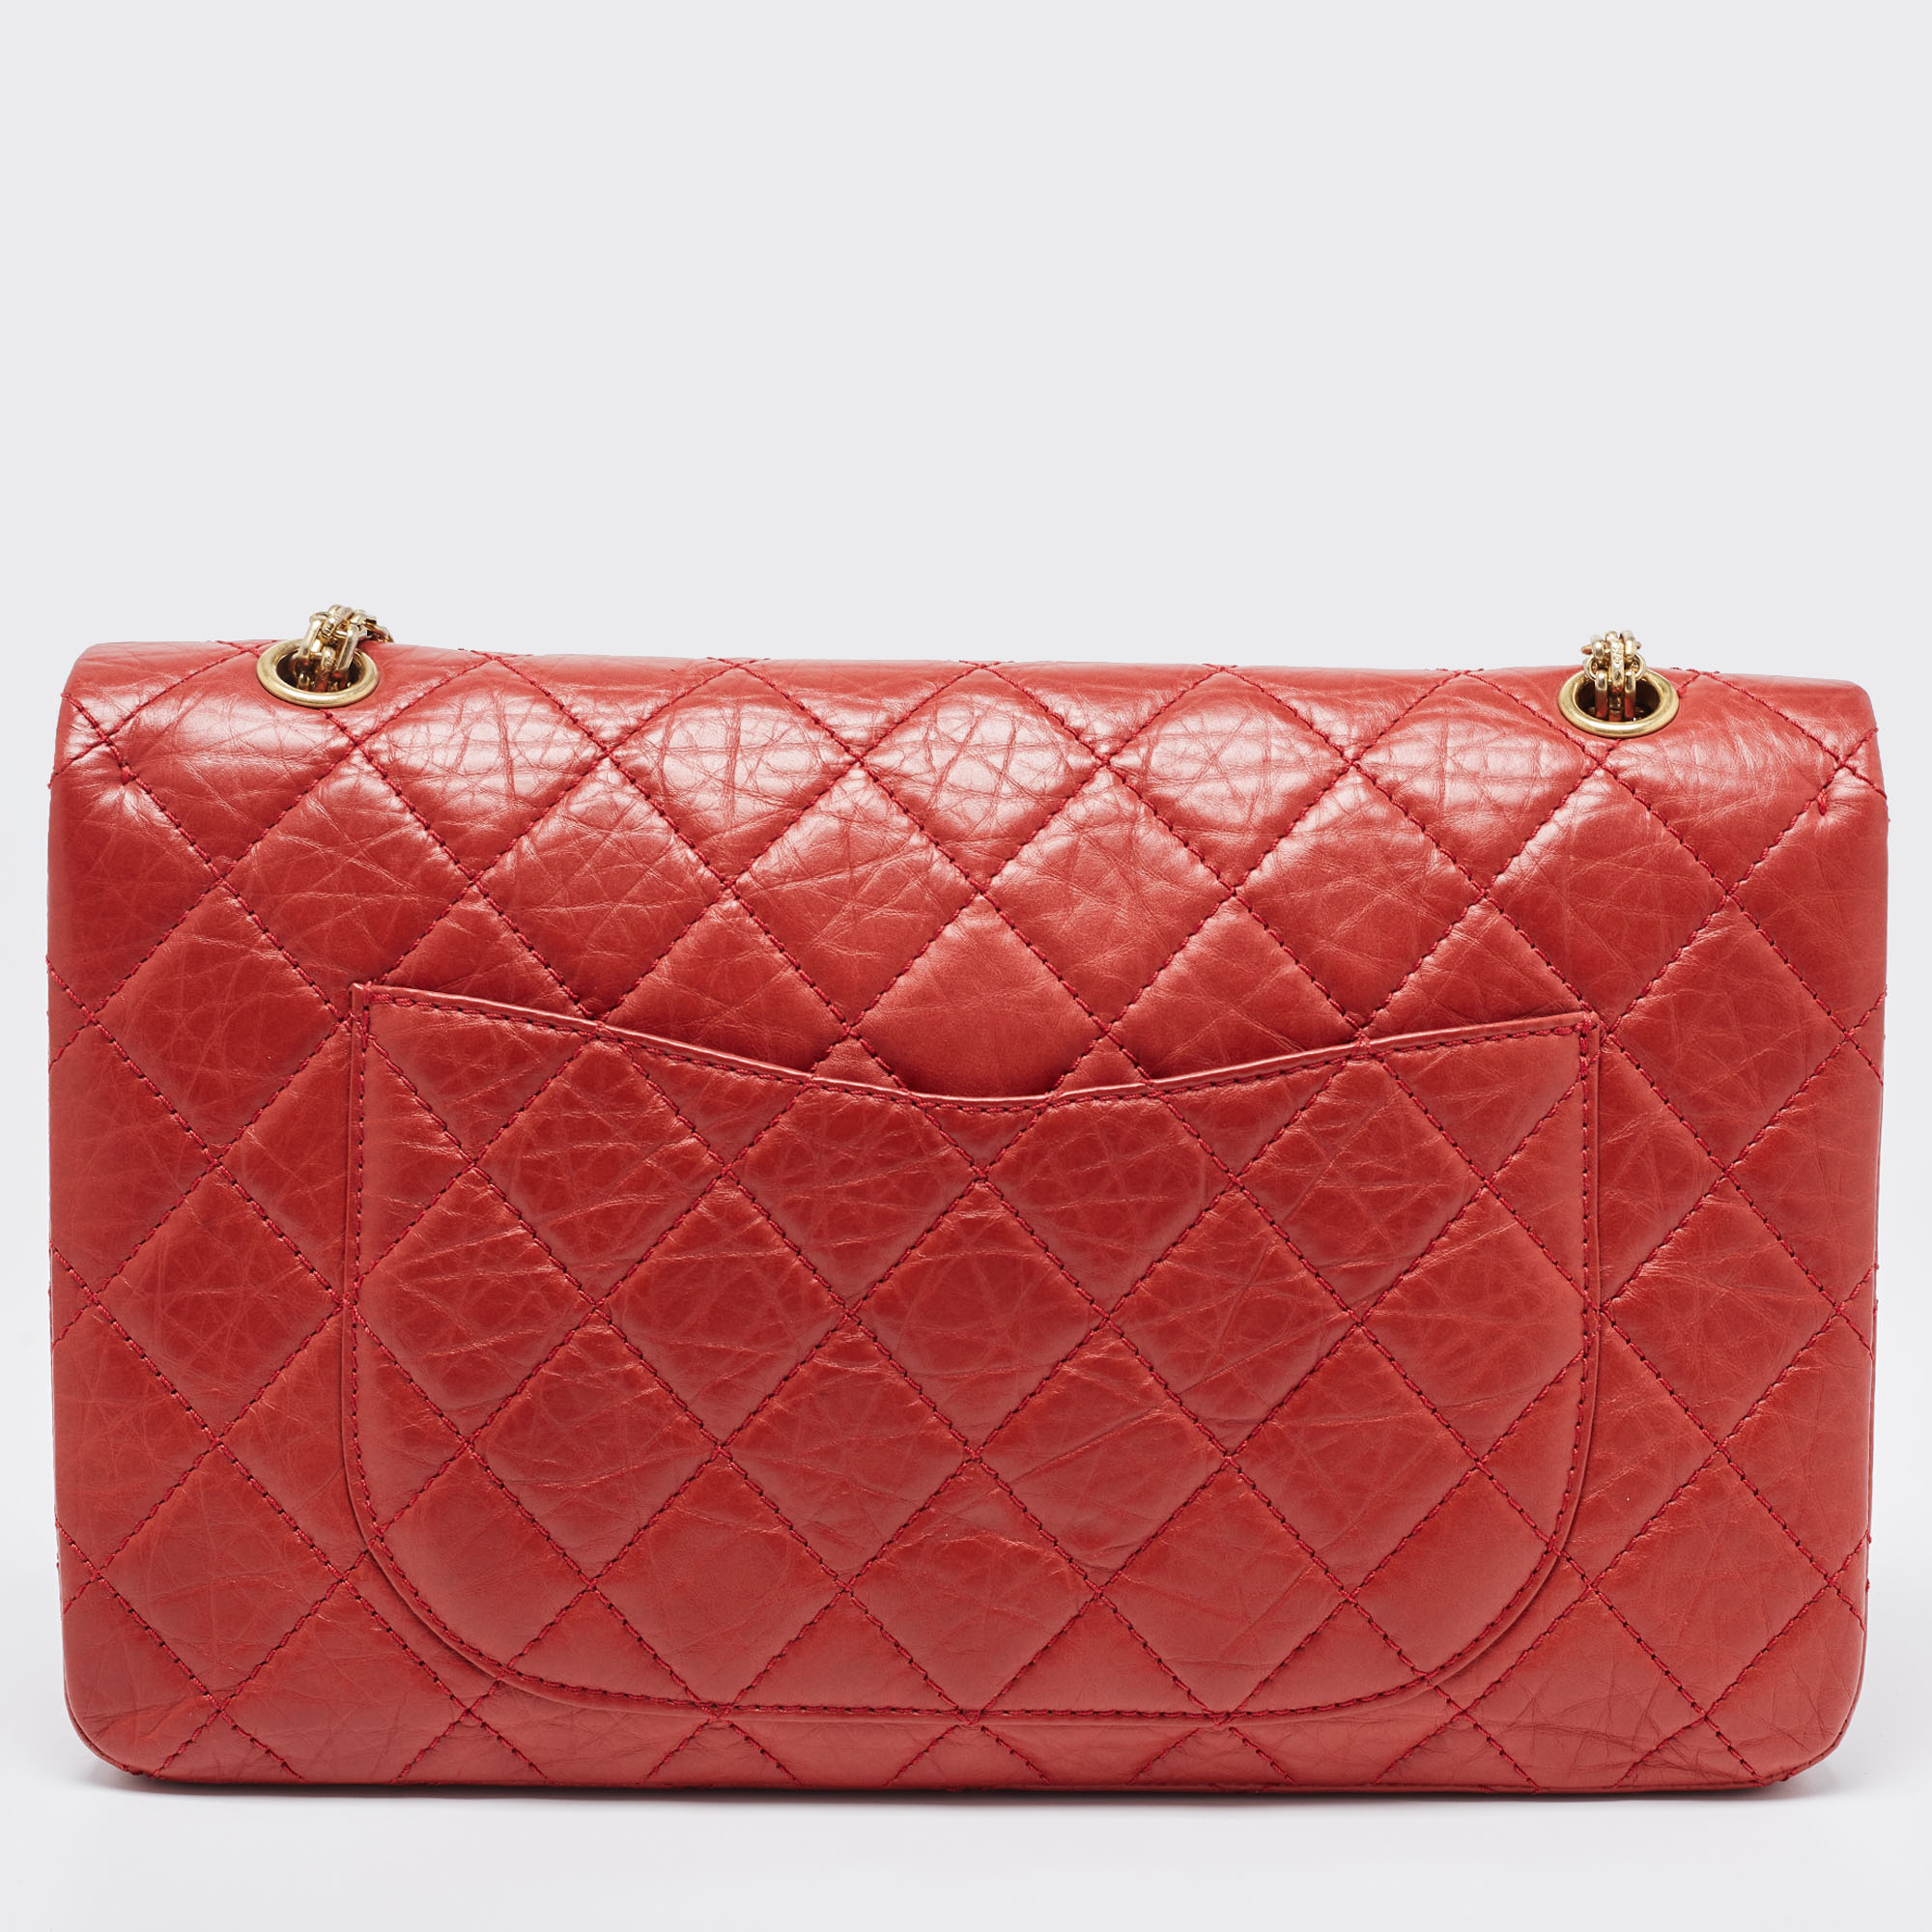 Chanel Red Quilted Aged Leather Reissue 2.55 Classic 227 Flap Bag